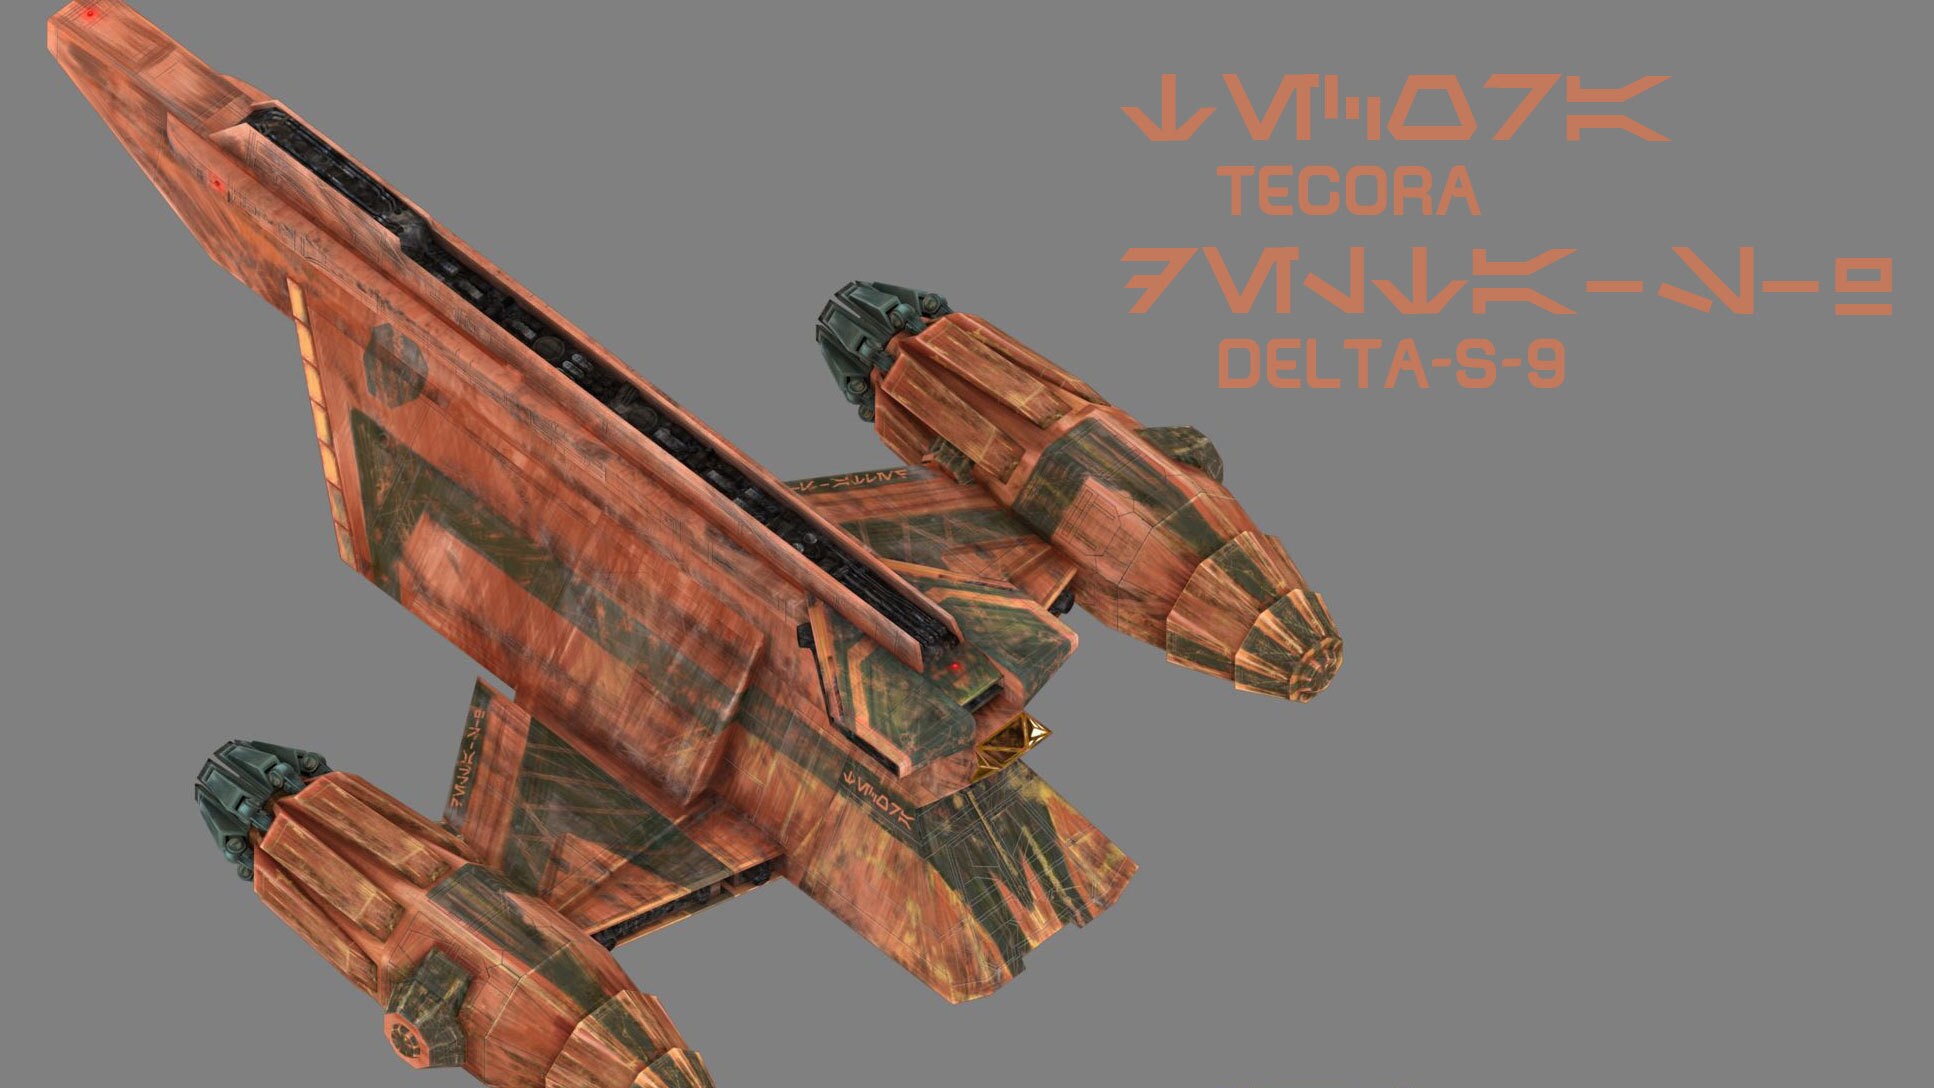 The Tecora has its name written on its hull in Aurebesh type, as well as the words "DELTA S-9" on...